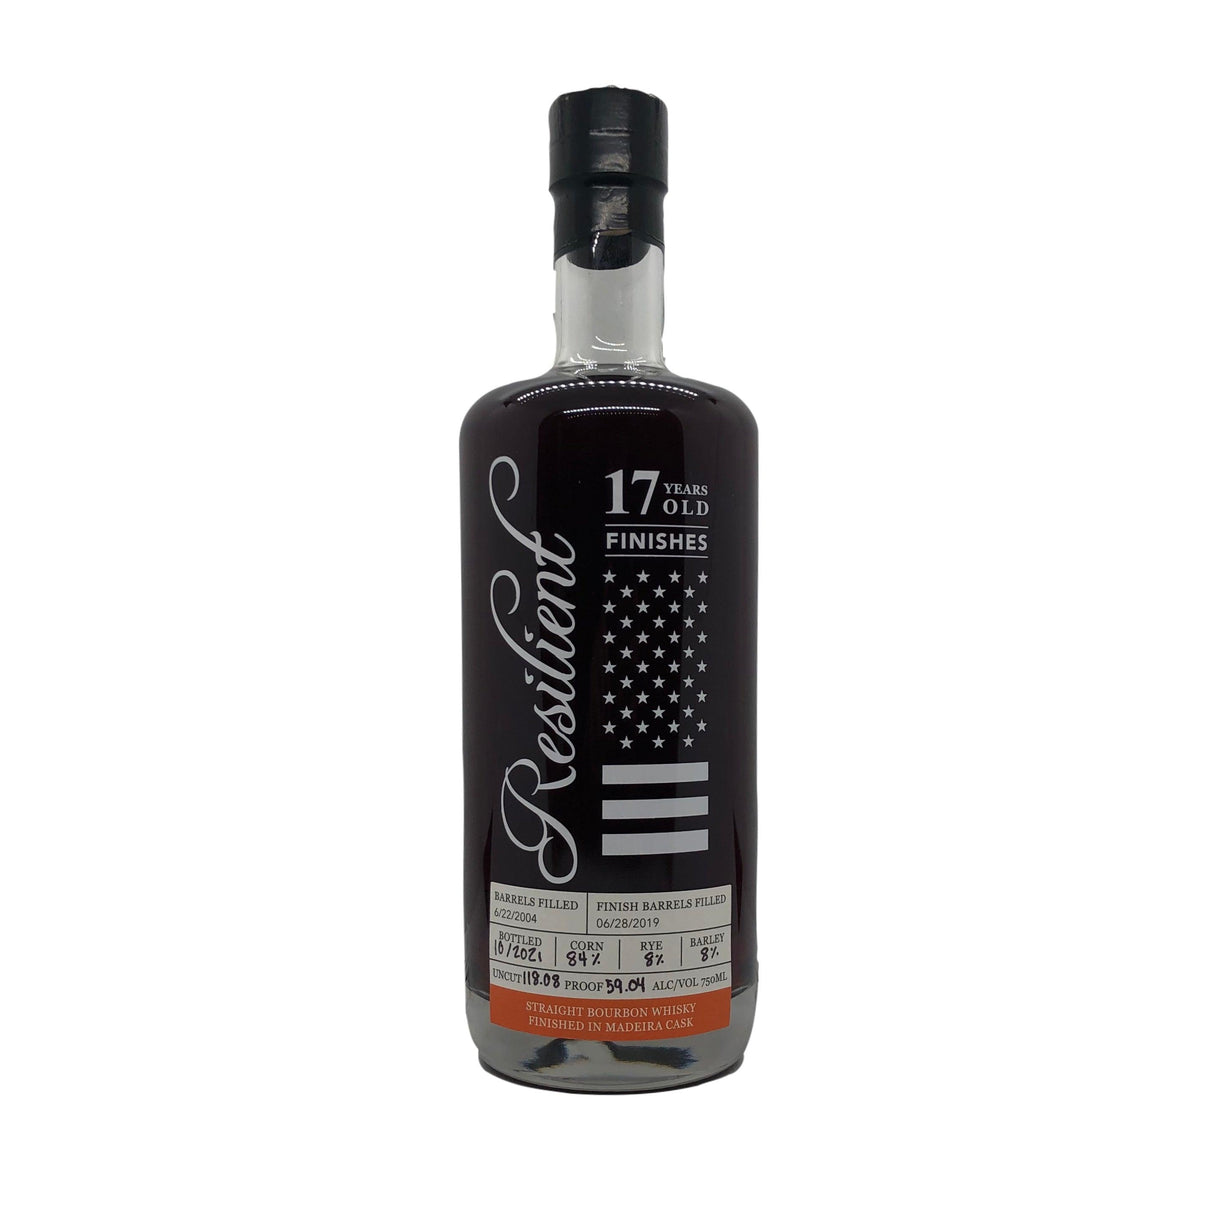 Resilient 17 Years Straight Bourbon Whiskey Finishes in Madeira Barrel - De Wine Spot | DWS - Drams/Whiskey, Wines, Sake